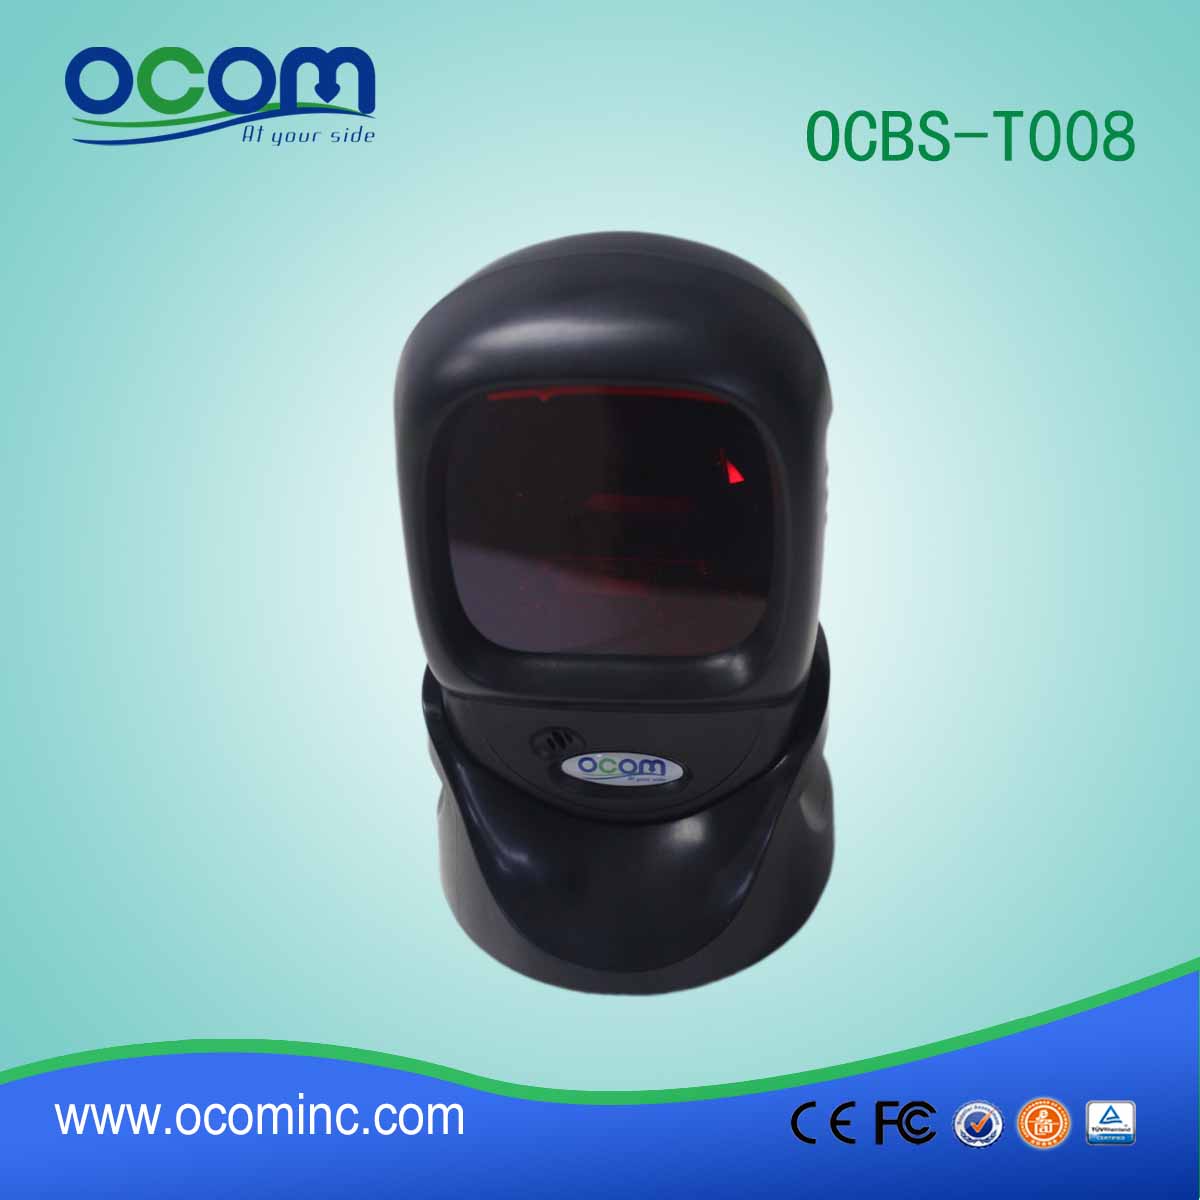 OCBS-T008 Supermarché Omini Cash Register Barcode Scanner POS